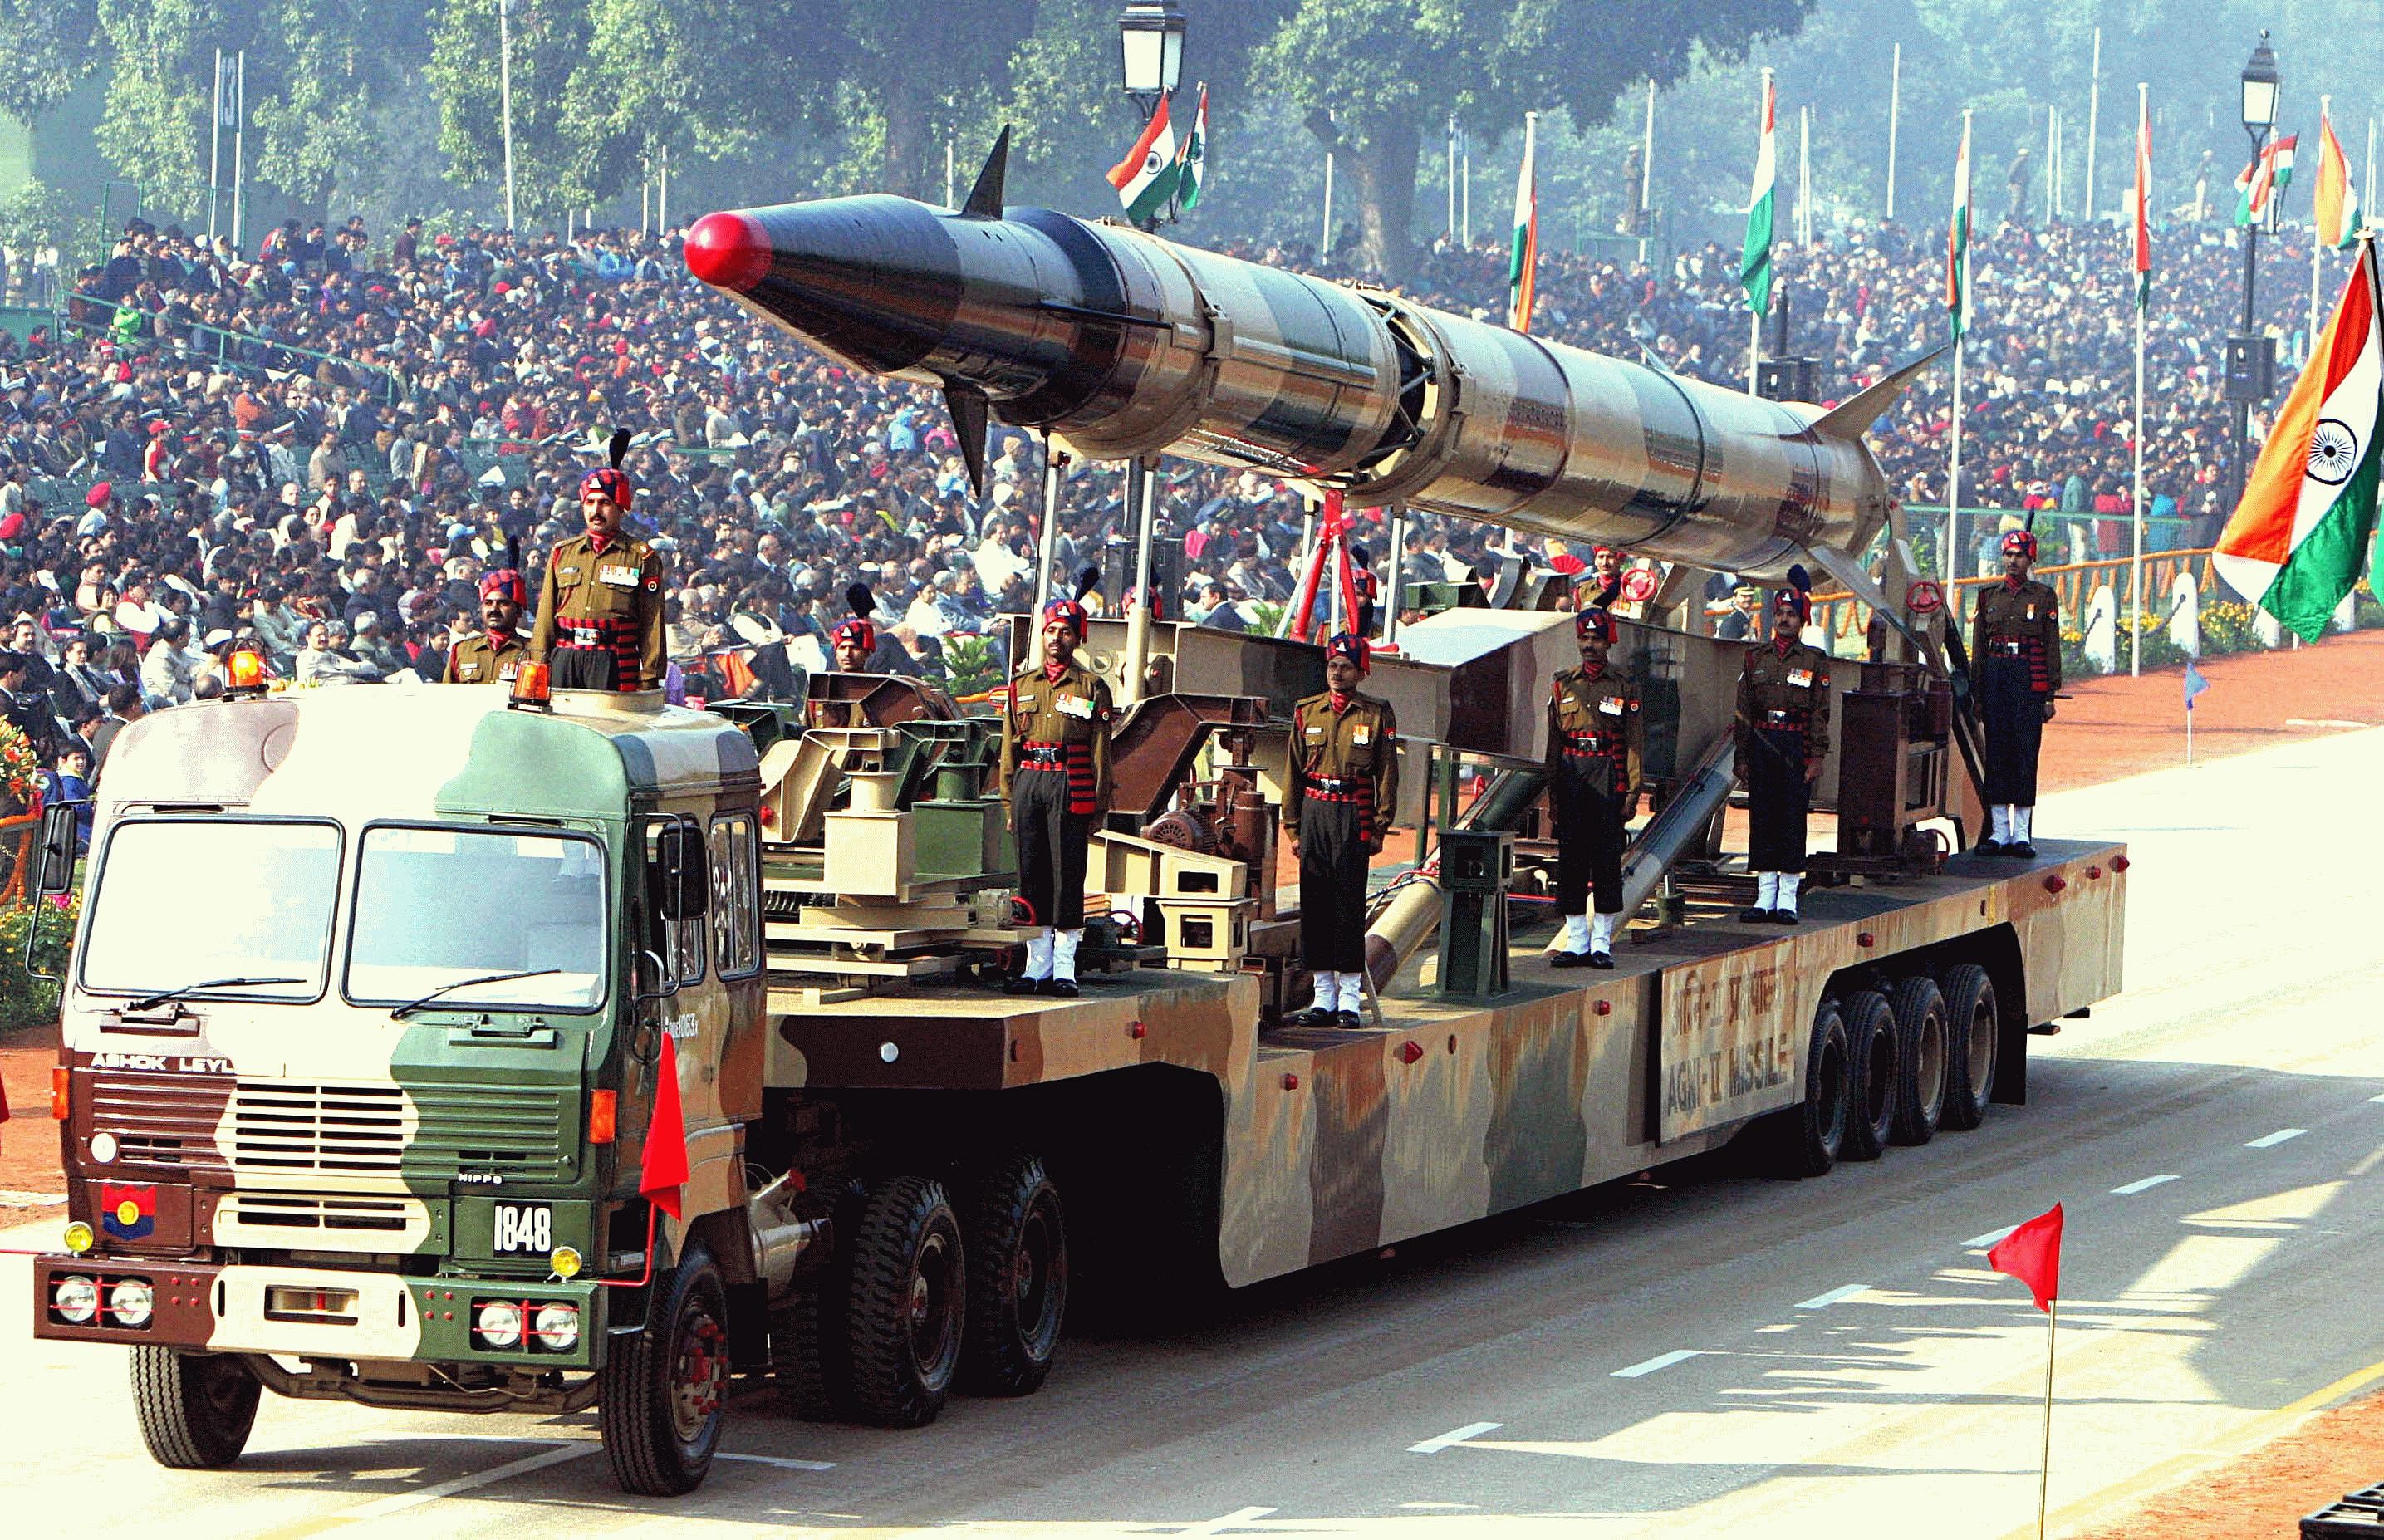 Agni-II missile on display during India's Republic Day parade in 2004. Photo collected from the web